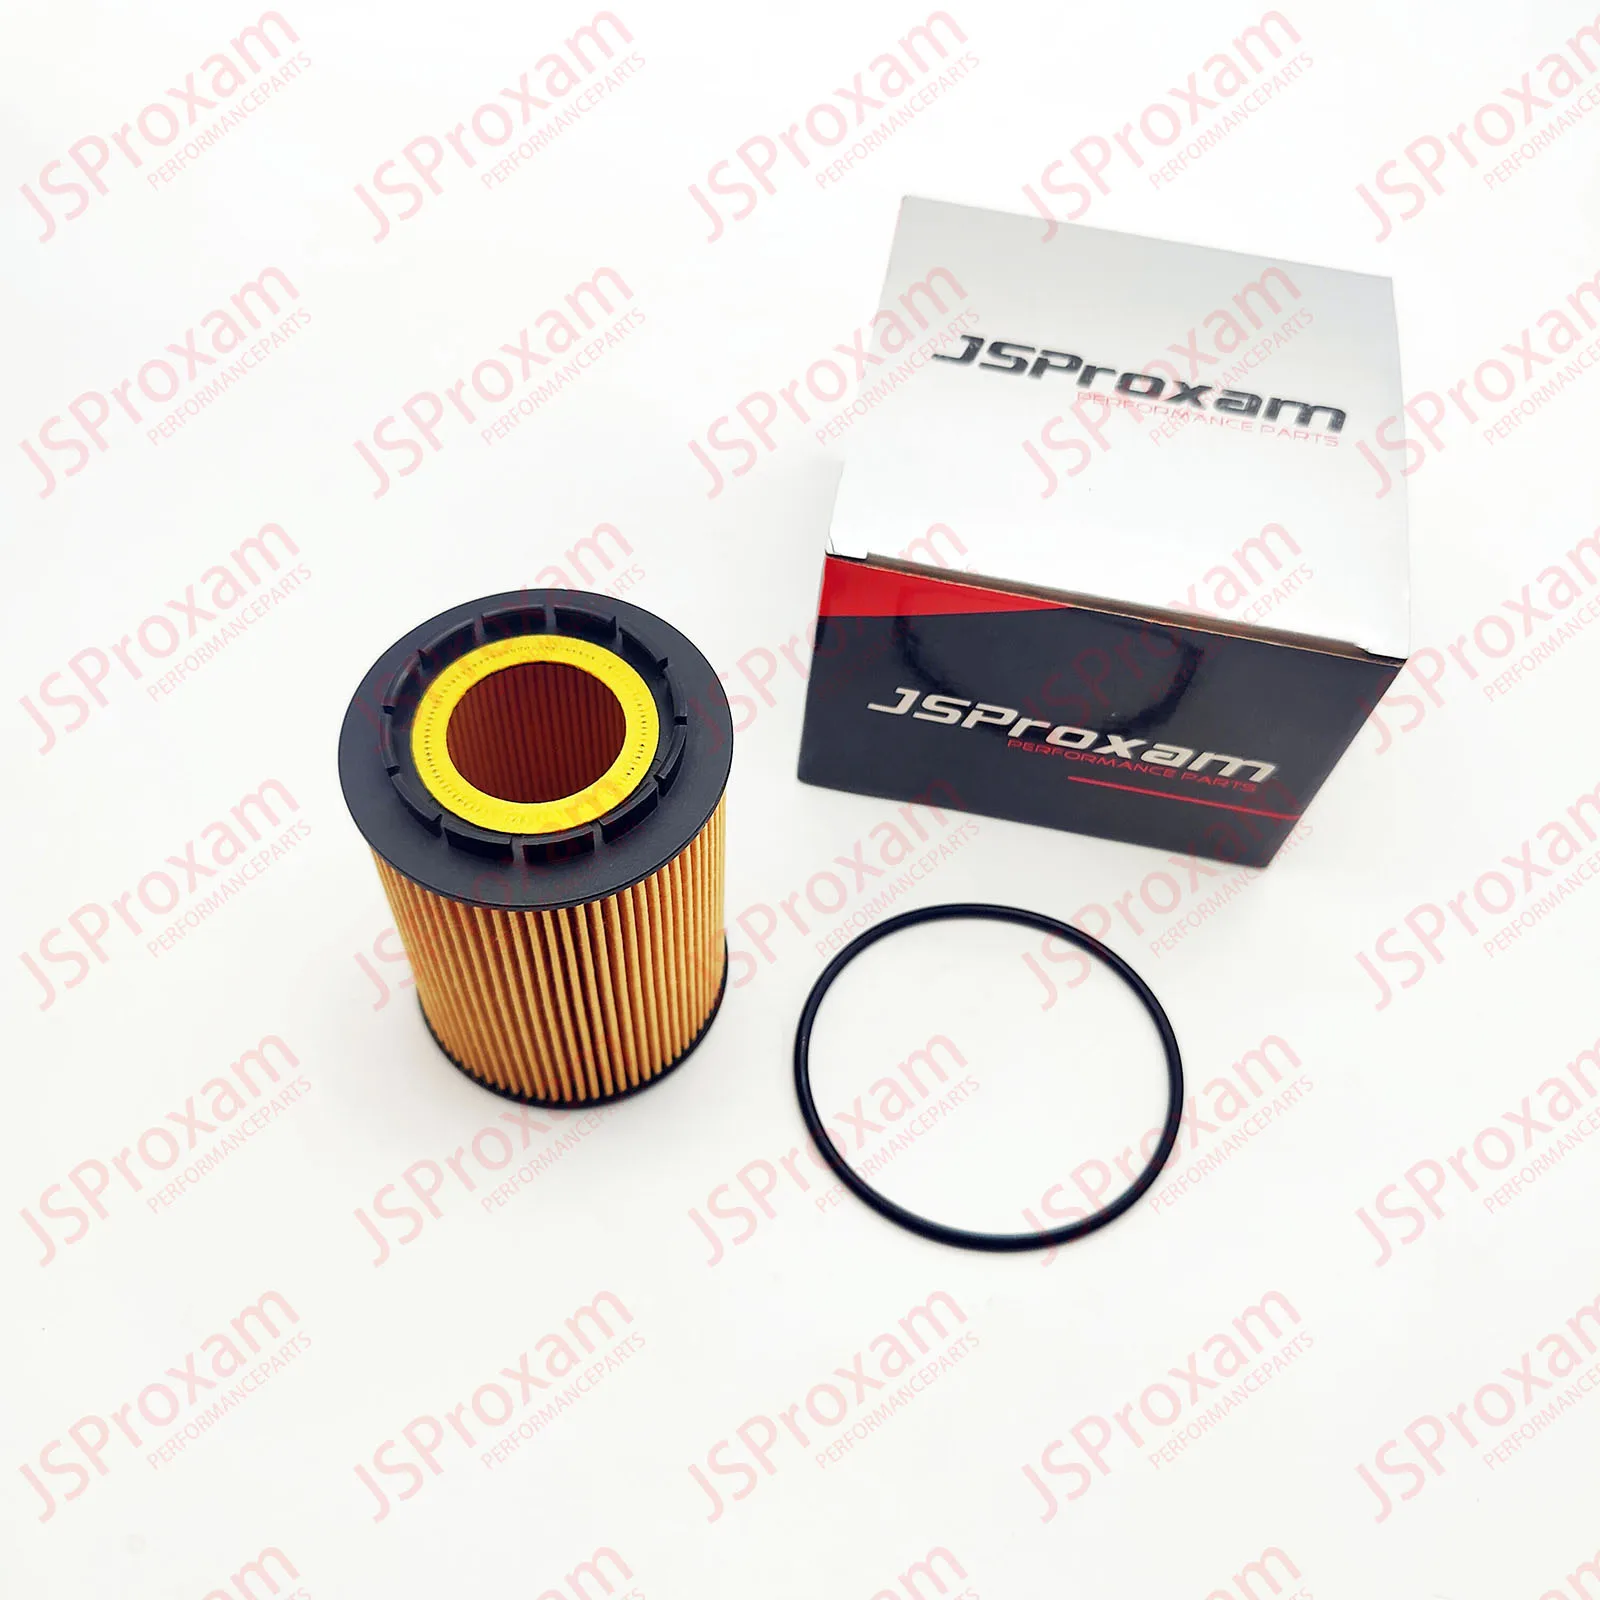 895207 35-895207 Fit For Replaces Mercruiser CMD QSD 2.0 2.8 4.2 83mm Diameter Diesel Oil Filter